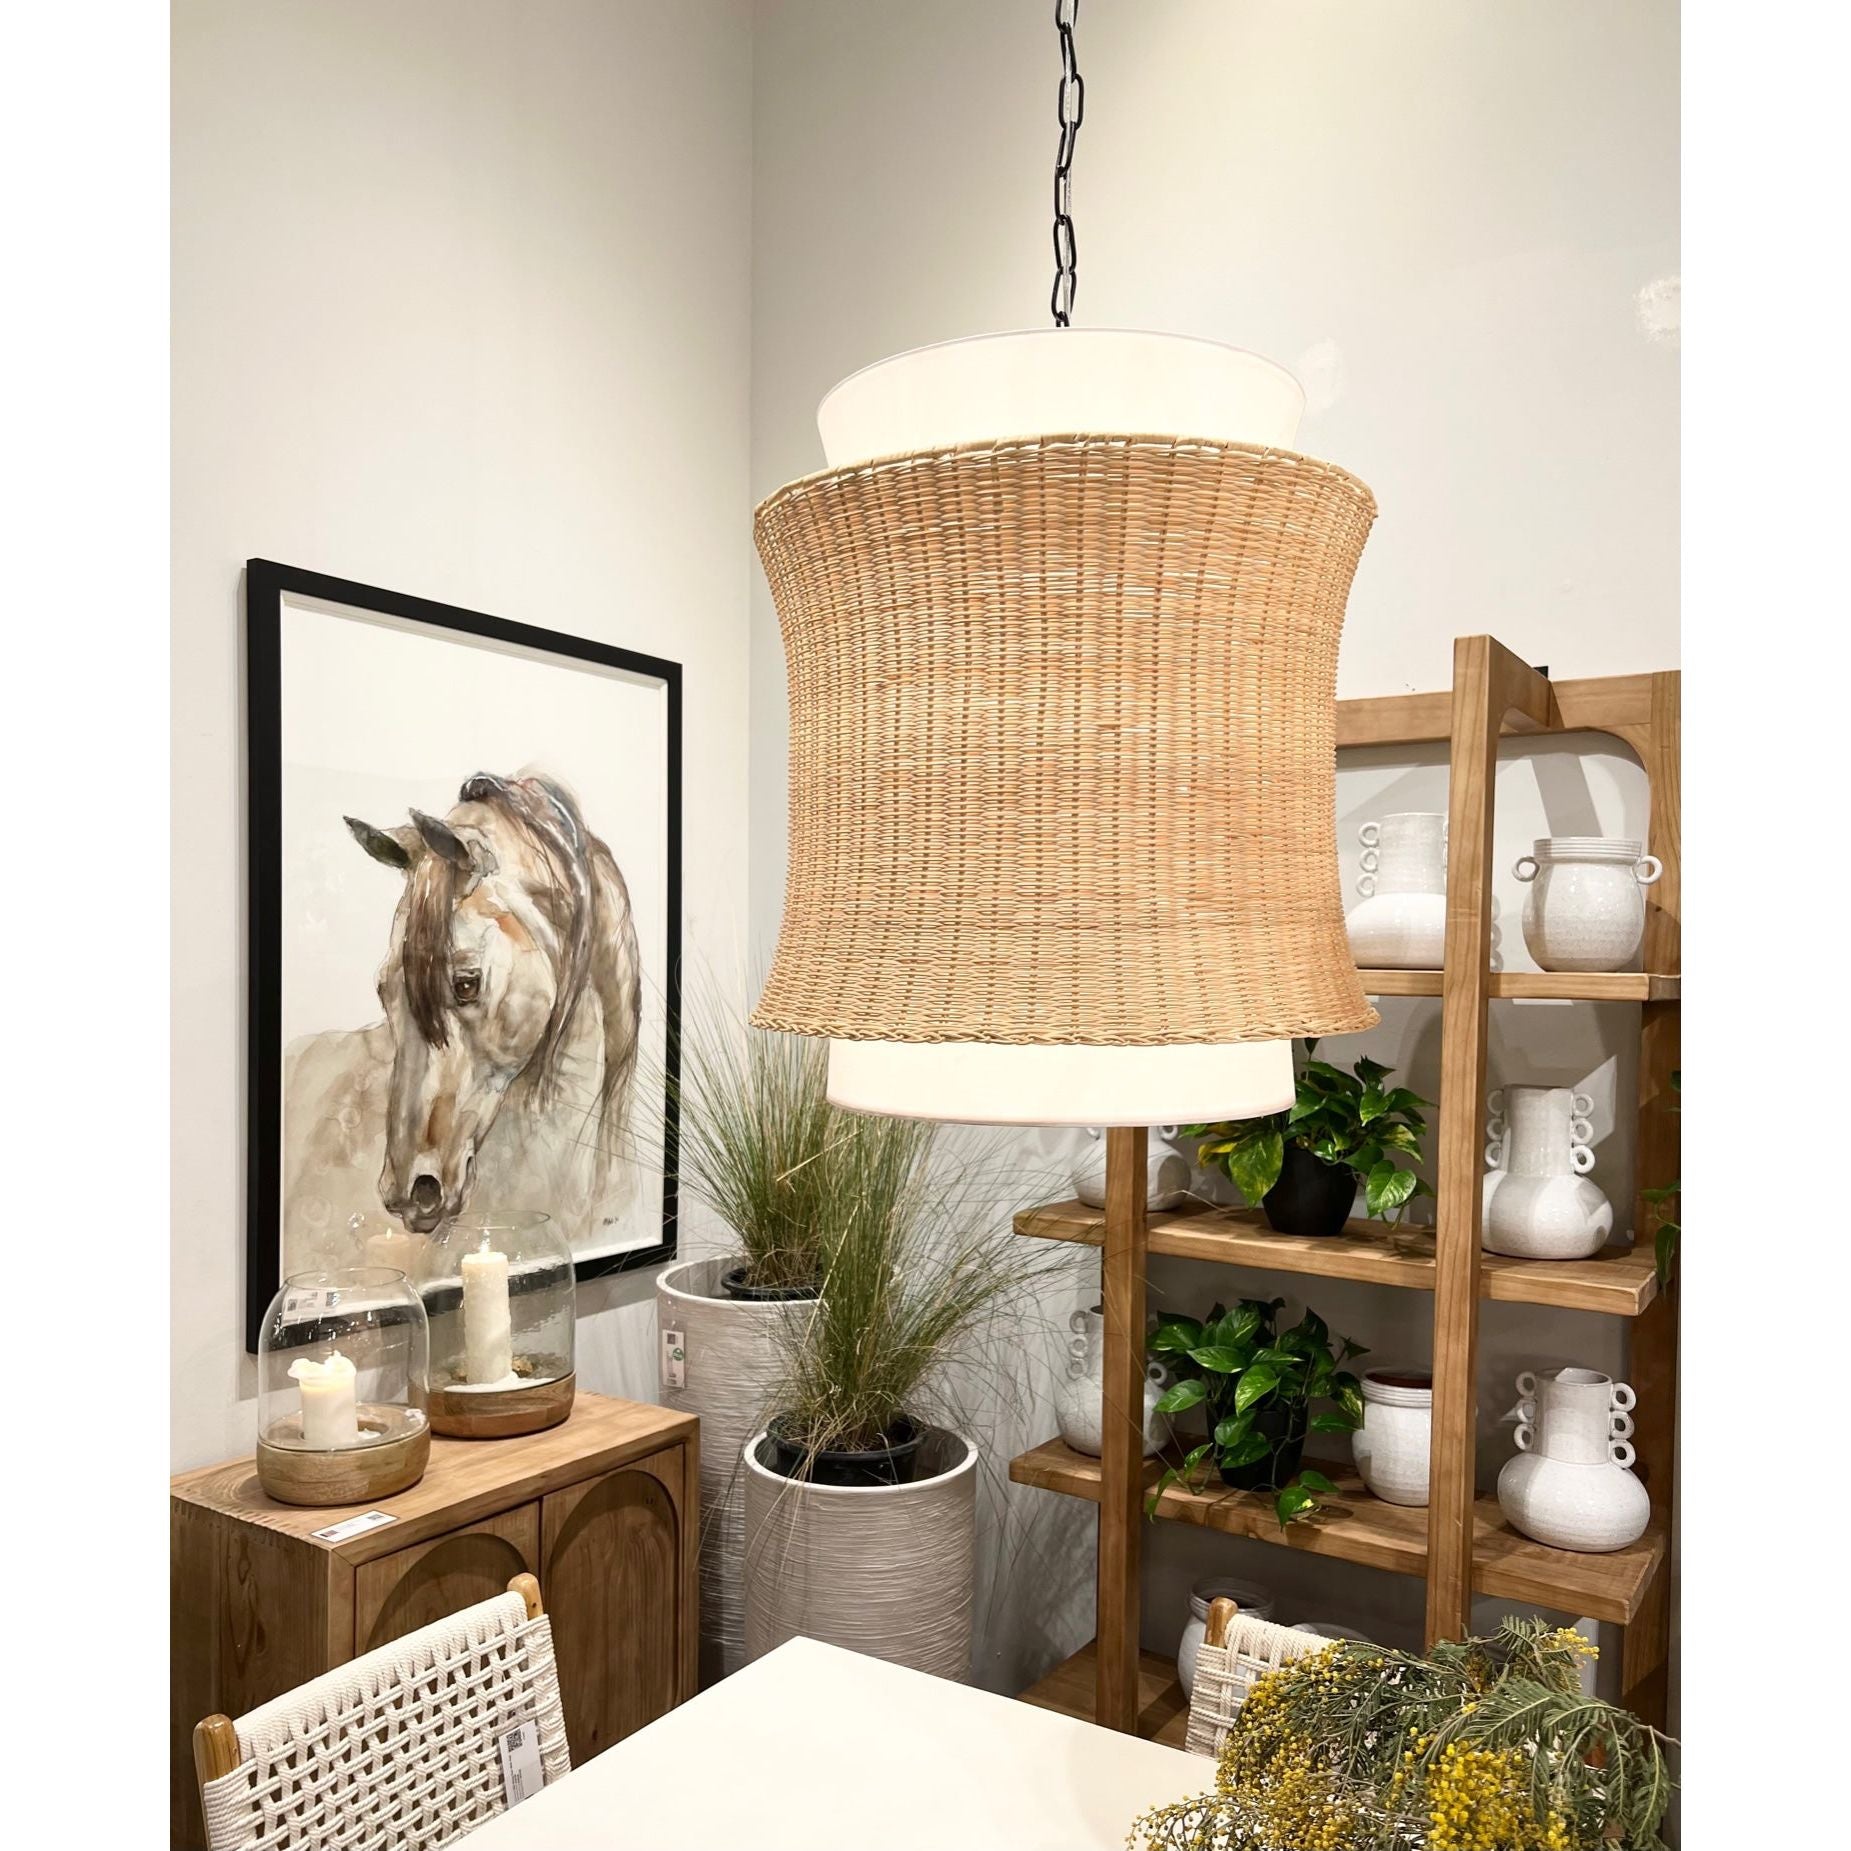 Made of fabric and beautifully natural woven rattan, the Chrisley Pendant Light is a wonderfully modern and airy fixture to hang above your kitchen island or bedroom nightstands. Amethyst Home provides interior design services, furniture, rugs, and lighting in the Calabasas metro area.